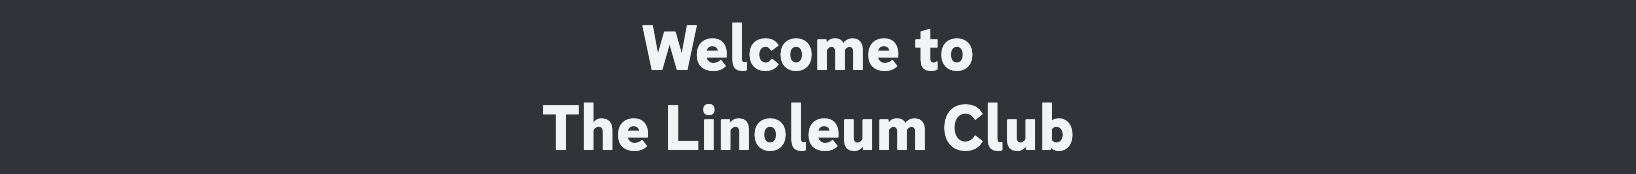 "Welcome to The Linoleum Club" in Discord's font